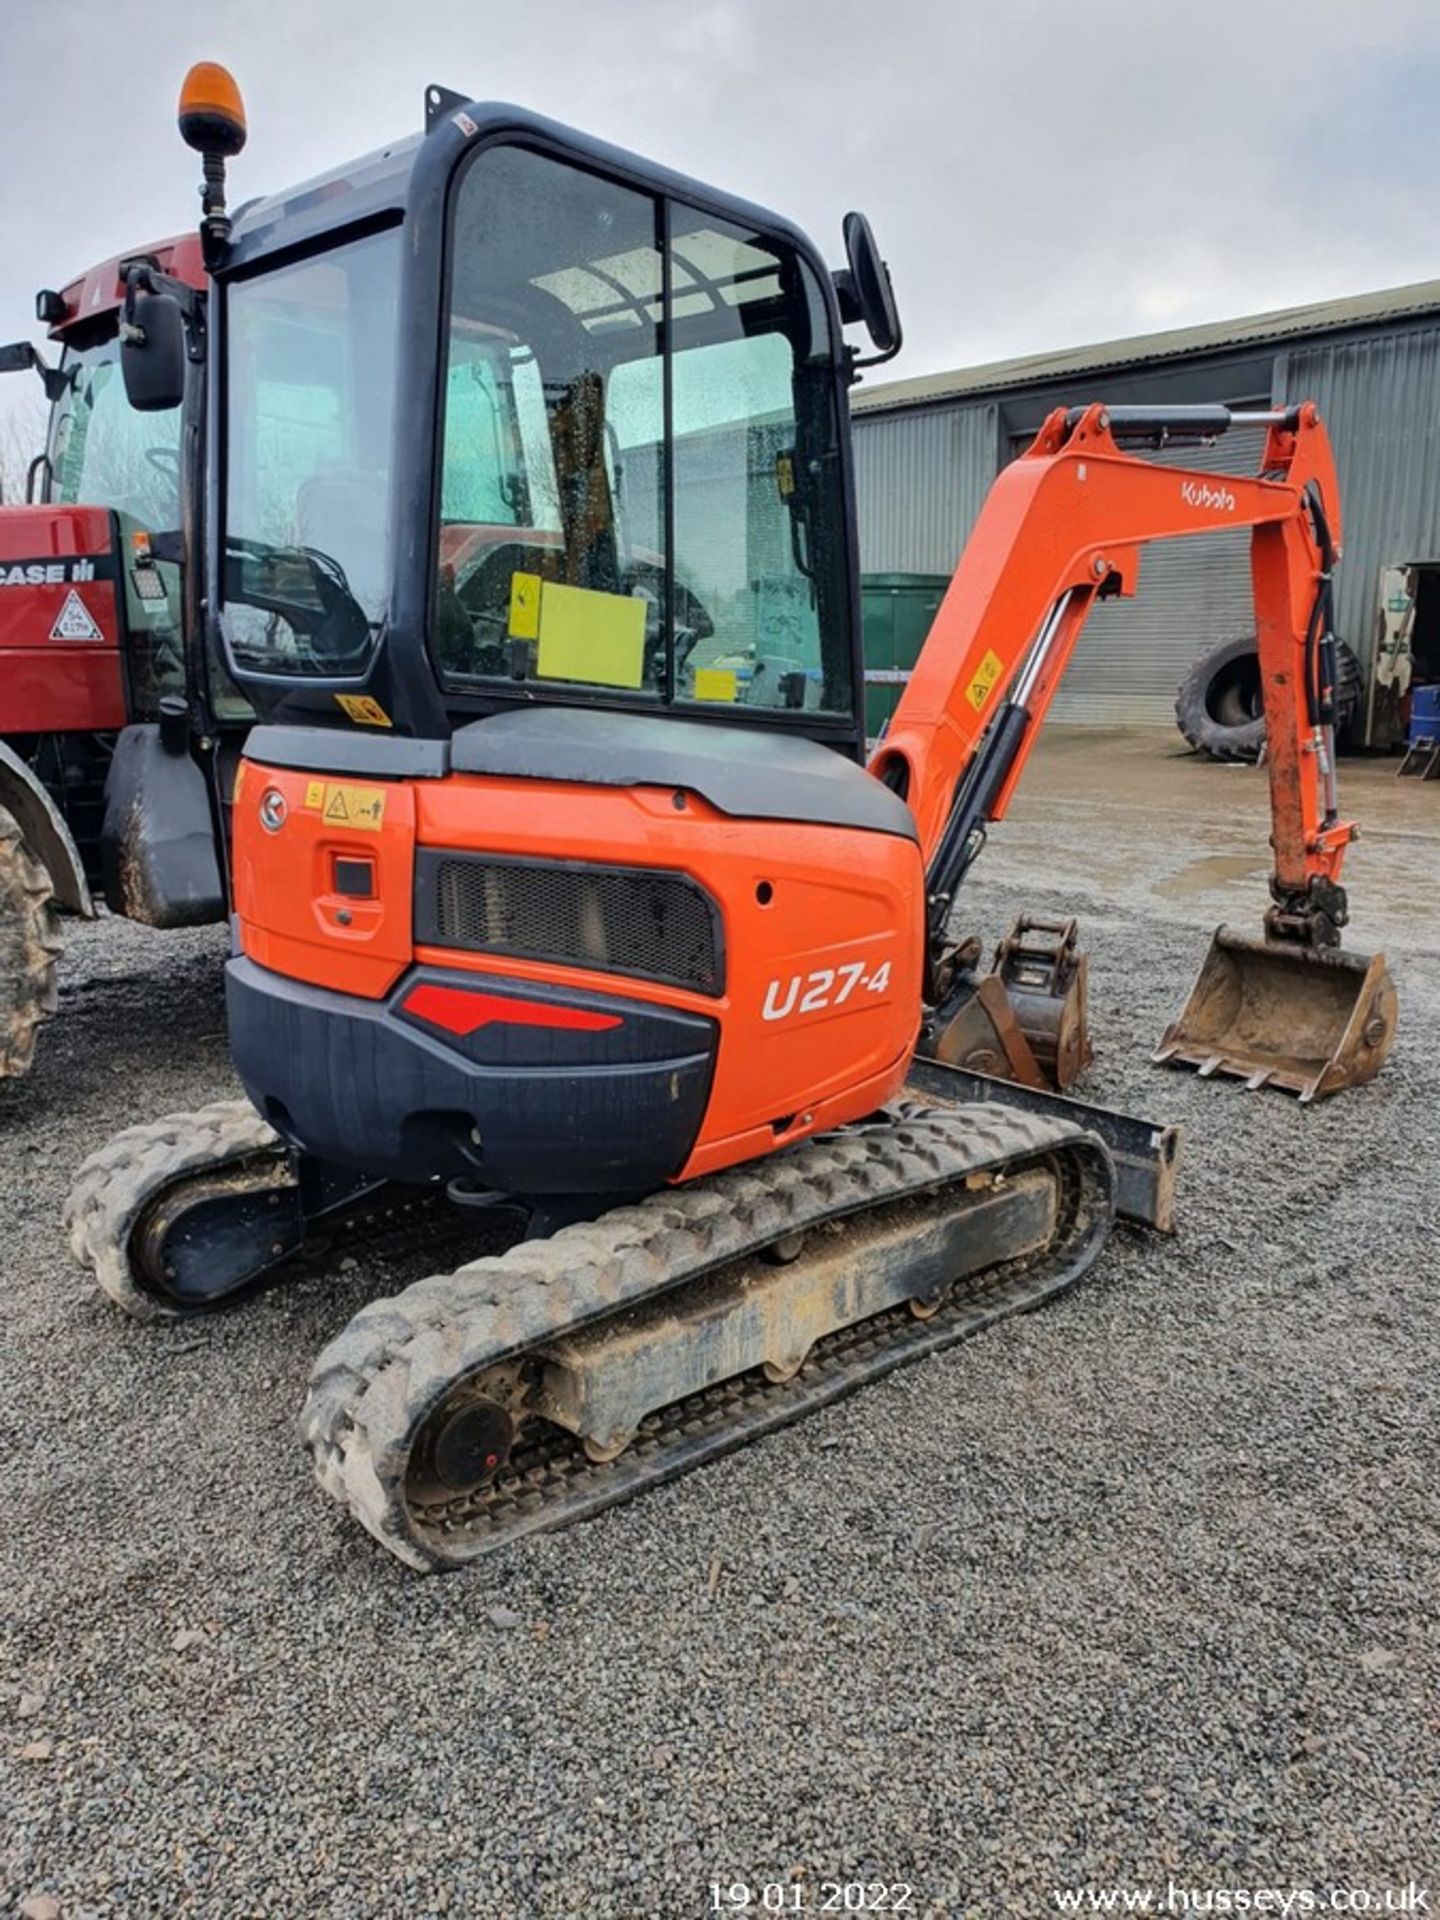 KUBOTA U27-4 DIGGER C.W 3 BUCKETS 2016 1725HRS RDD (COLLECT FROM WINKLEIGH) - Image 2 of 6